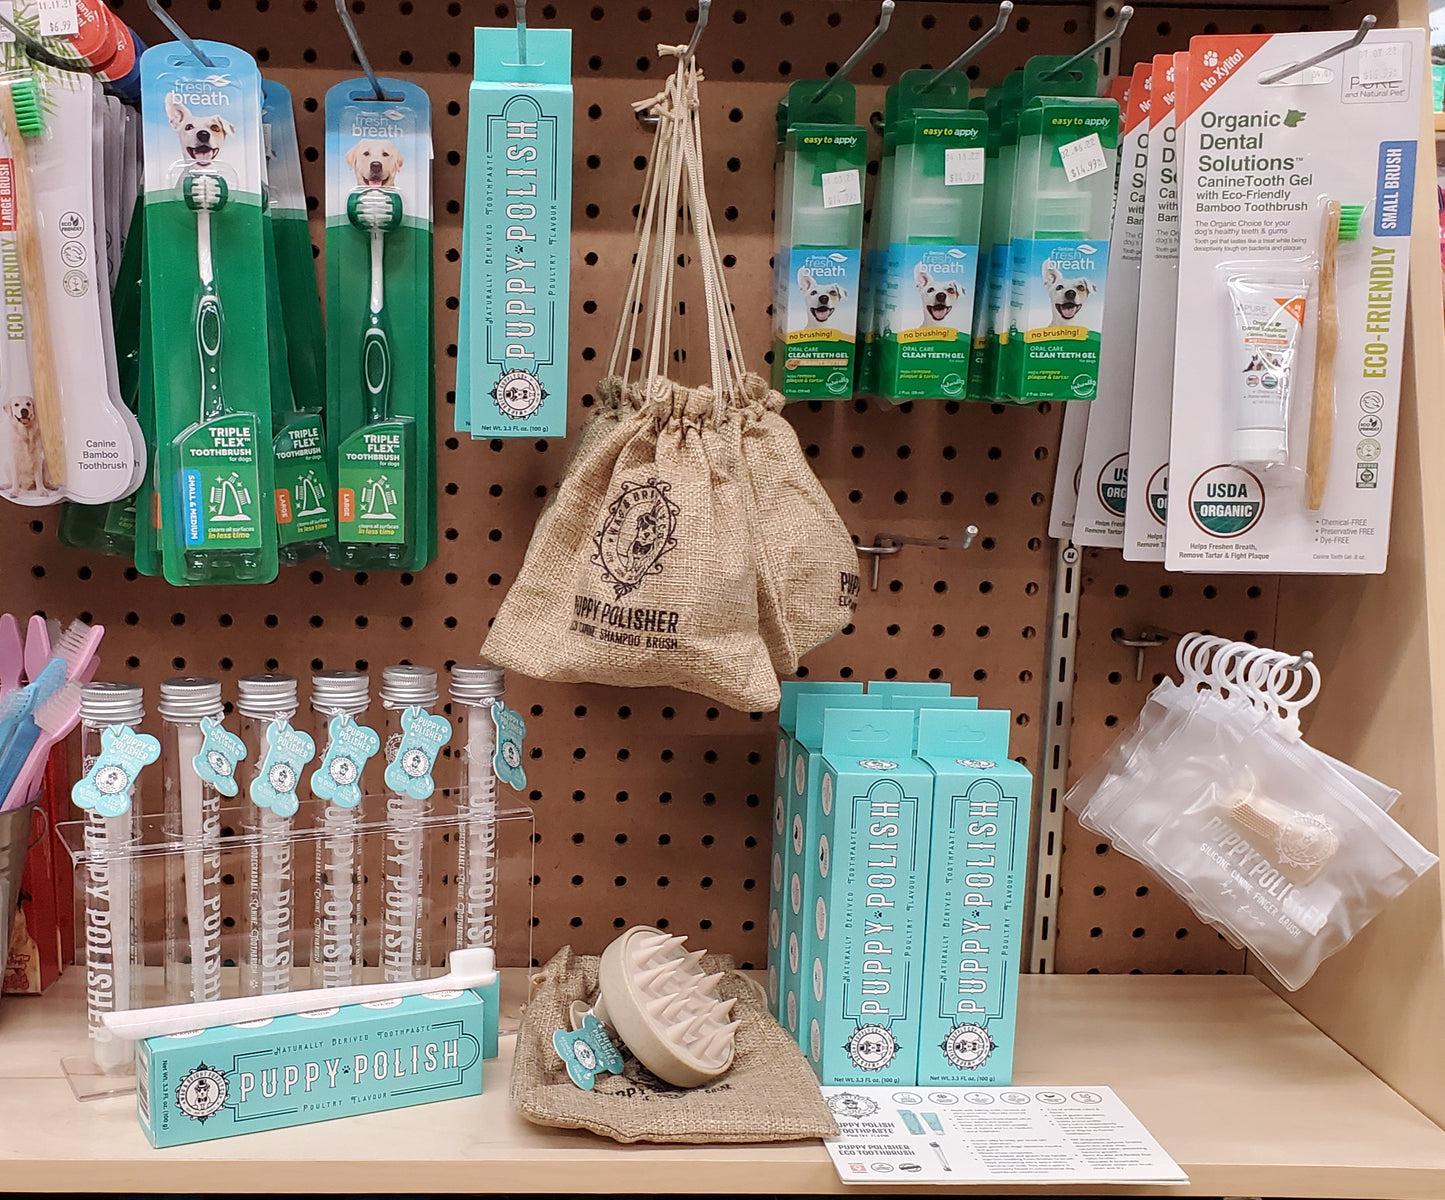 Store Photo with Puppy Polish Toothpaste and toothbrushes, finger brush and shampoo brush